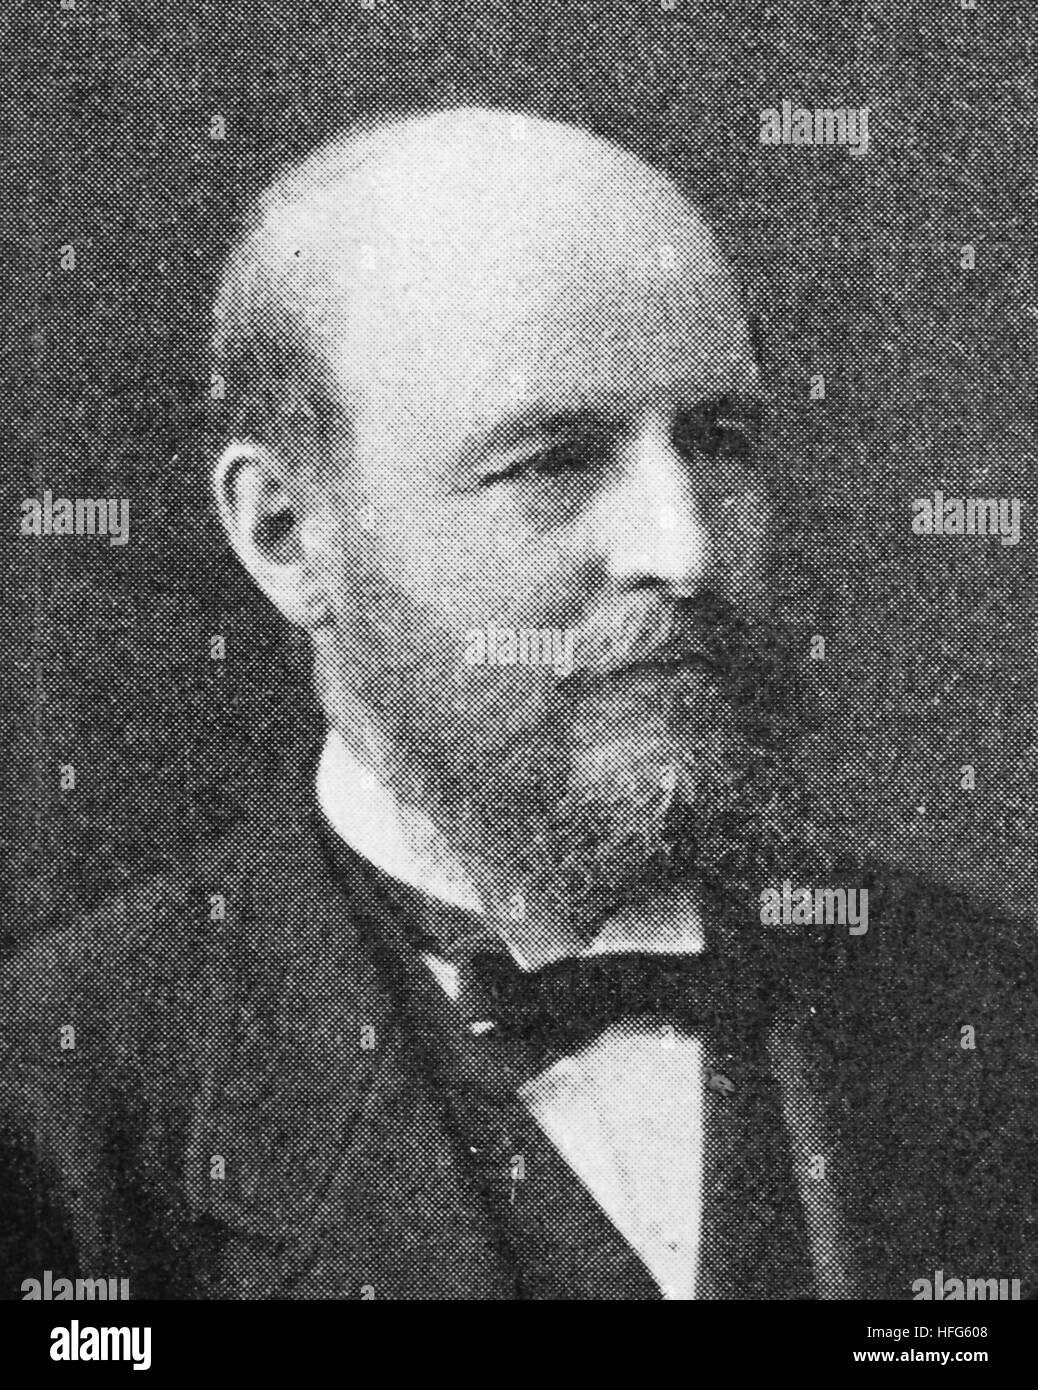 Botho Wendt August Graf zu Eulenburg, 1831 - 1912, was a Prussian statesman., reproduction photo from the year 1895, digital improved Stock Photo